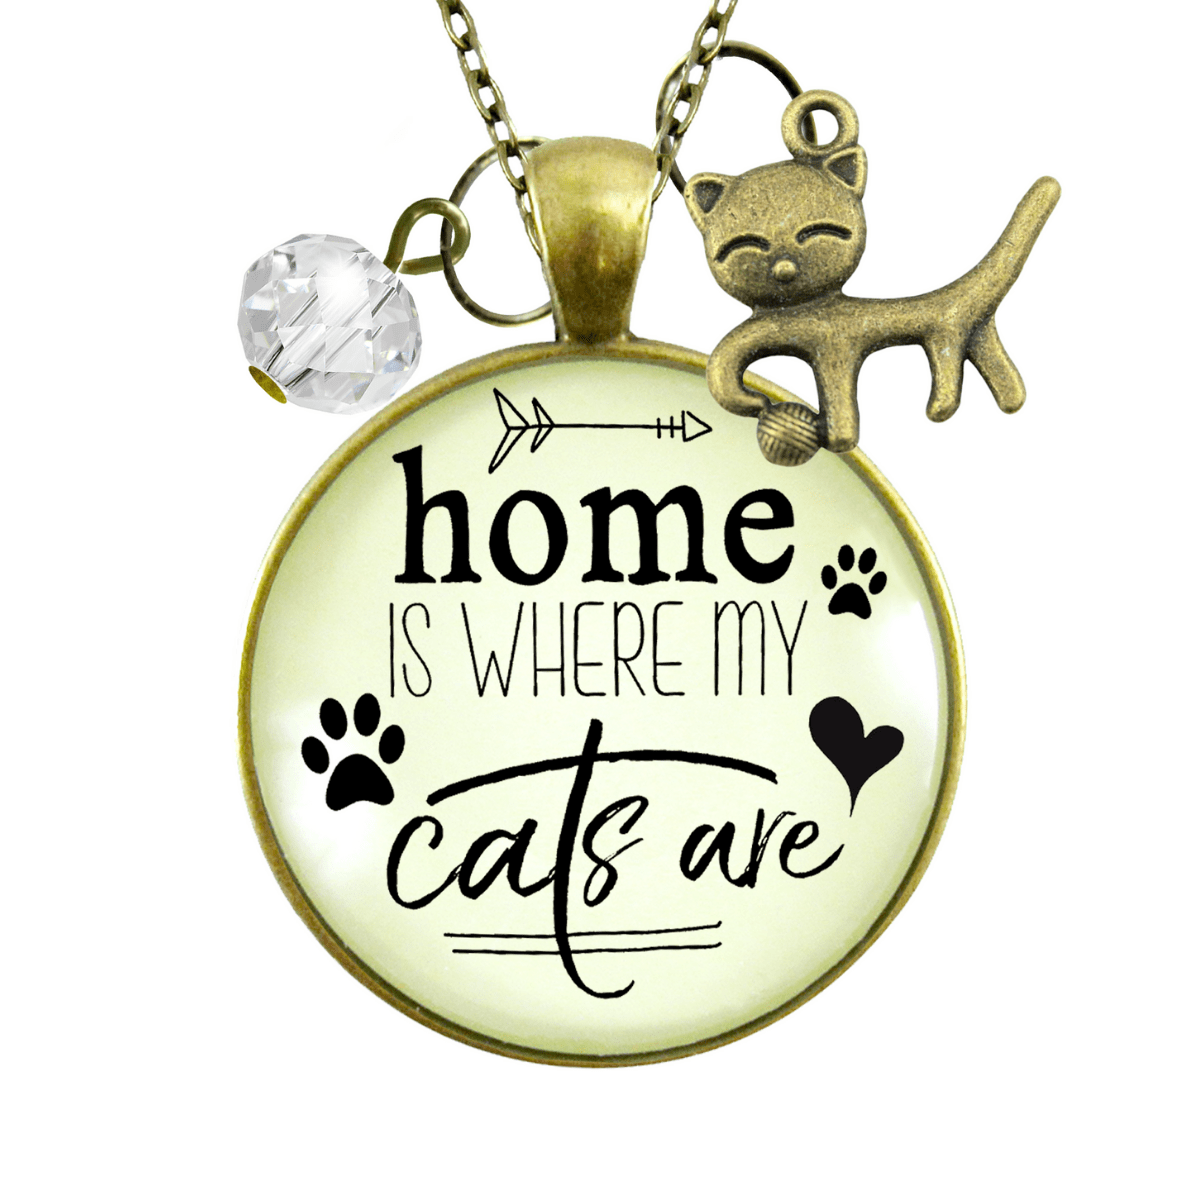 Gutsy Goodness Cats Necklace Home is Where My Cats Kitty Saying Feline Gift Womens Jewelry - Gutsy Goodness Handmade Jewelry;Cats Necklace Home Is Where My Cats Kitty Saying Feline Gift Womens Jewelry - Gutsy Goodness Handmade Jewelry Gifts